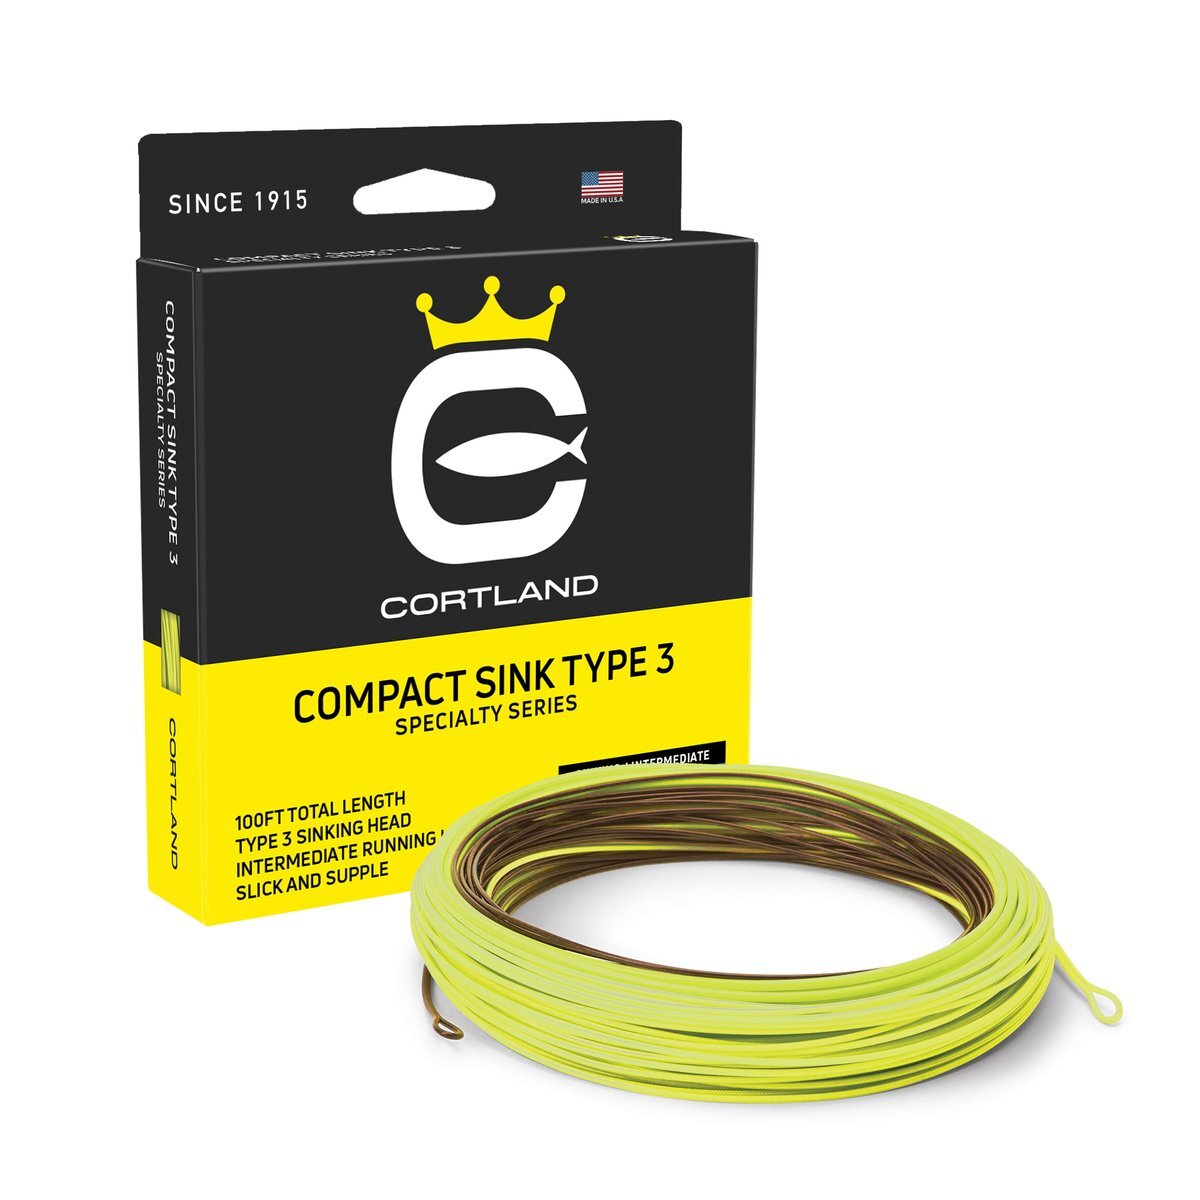 Cortland Compact Sink Type 3 Fly Line